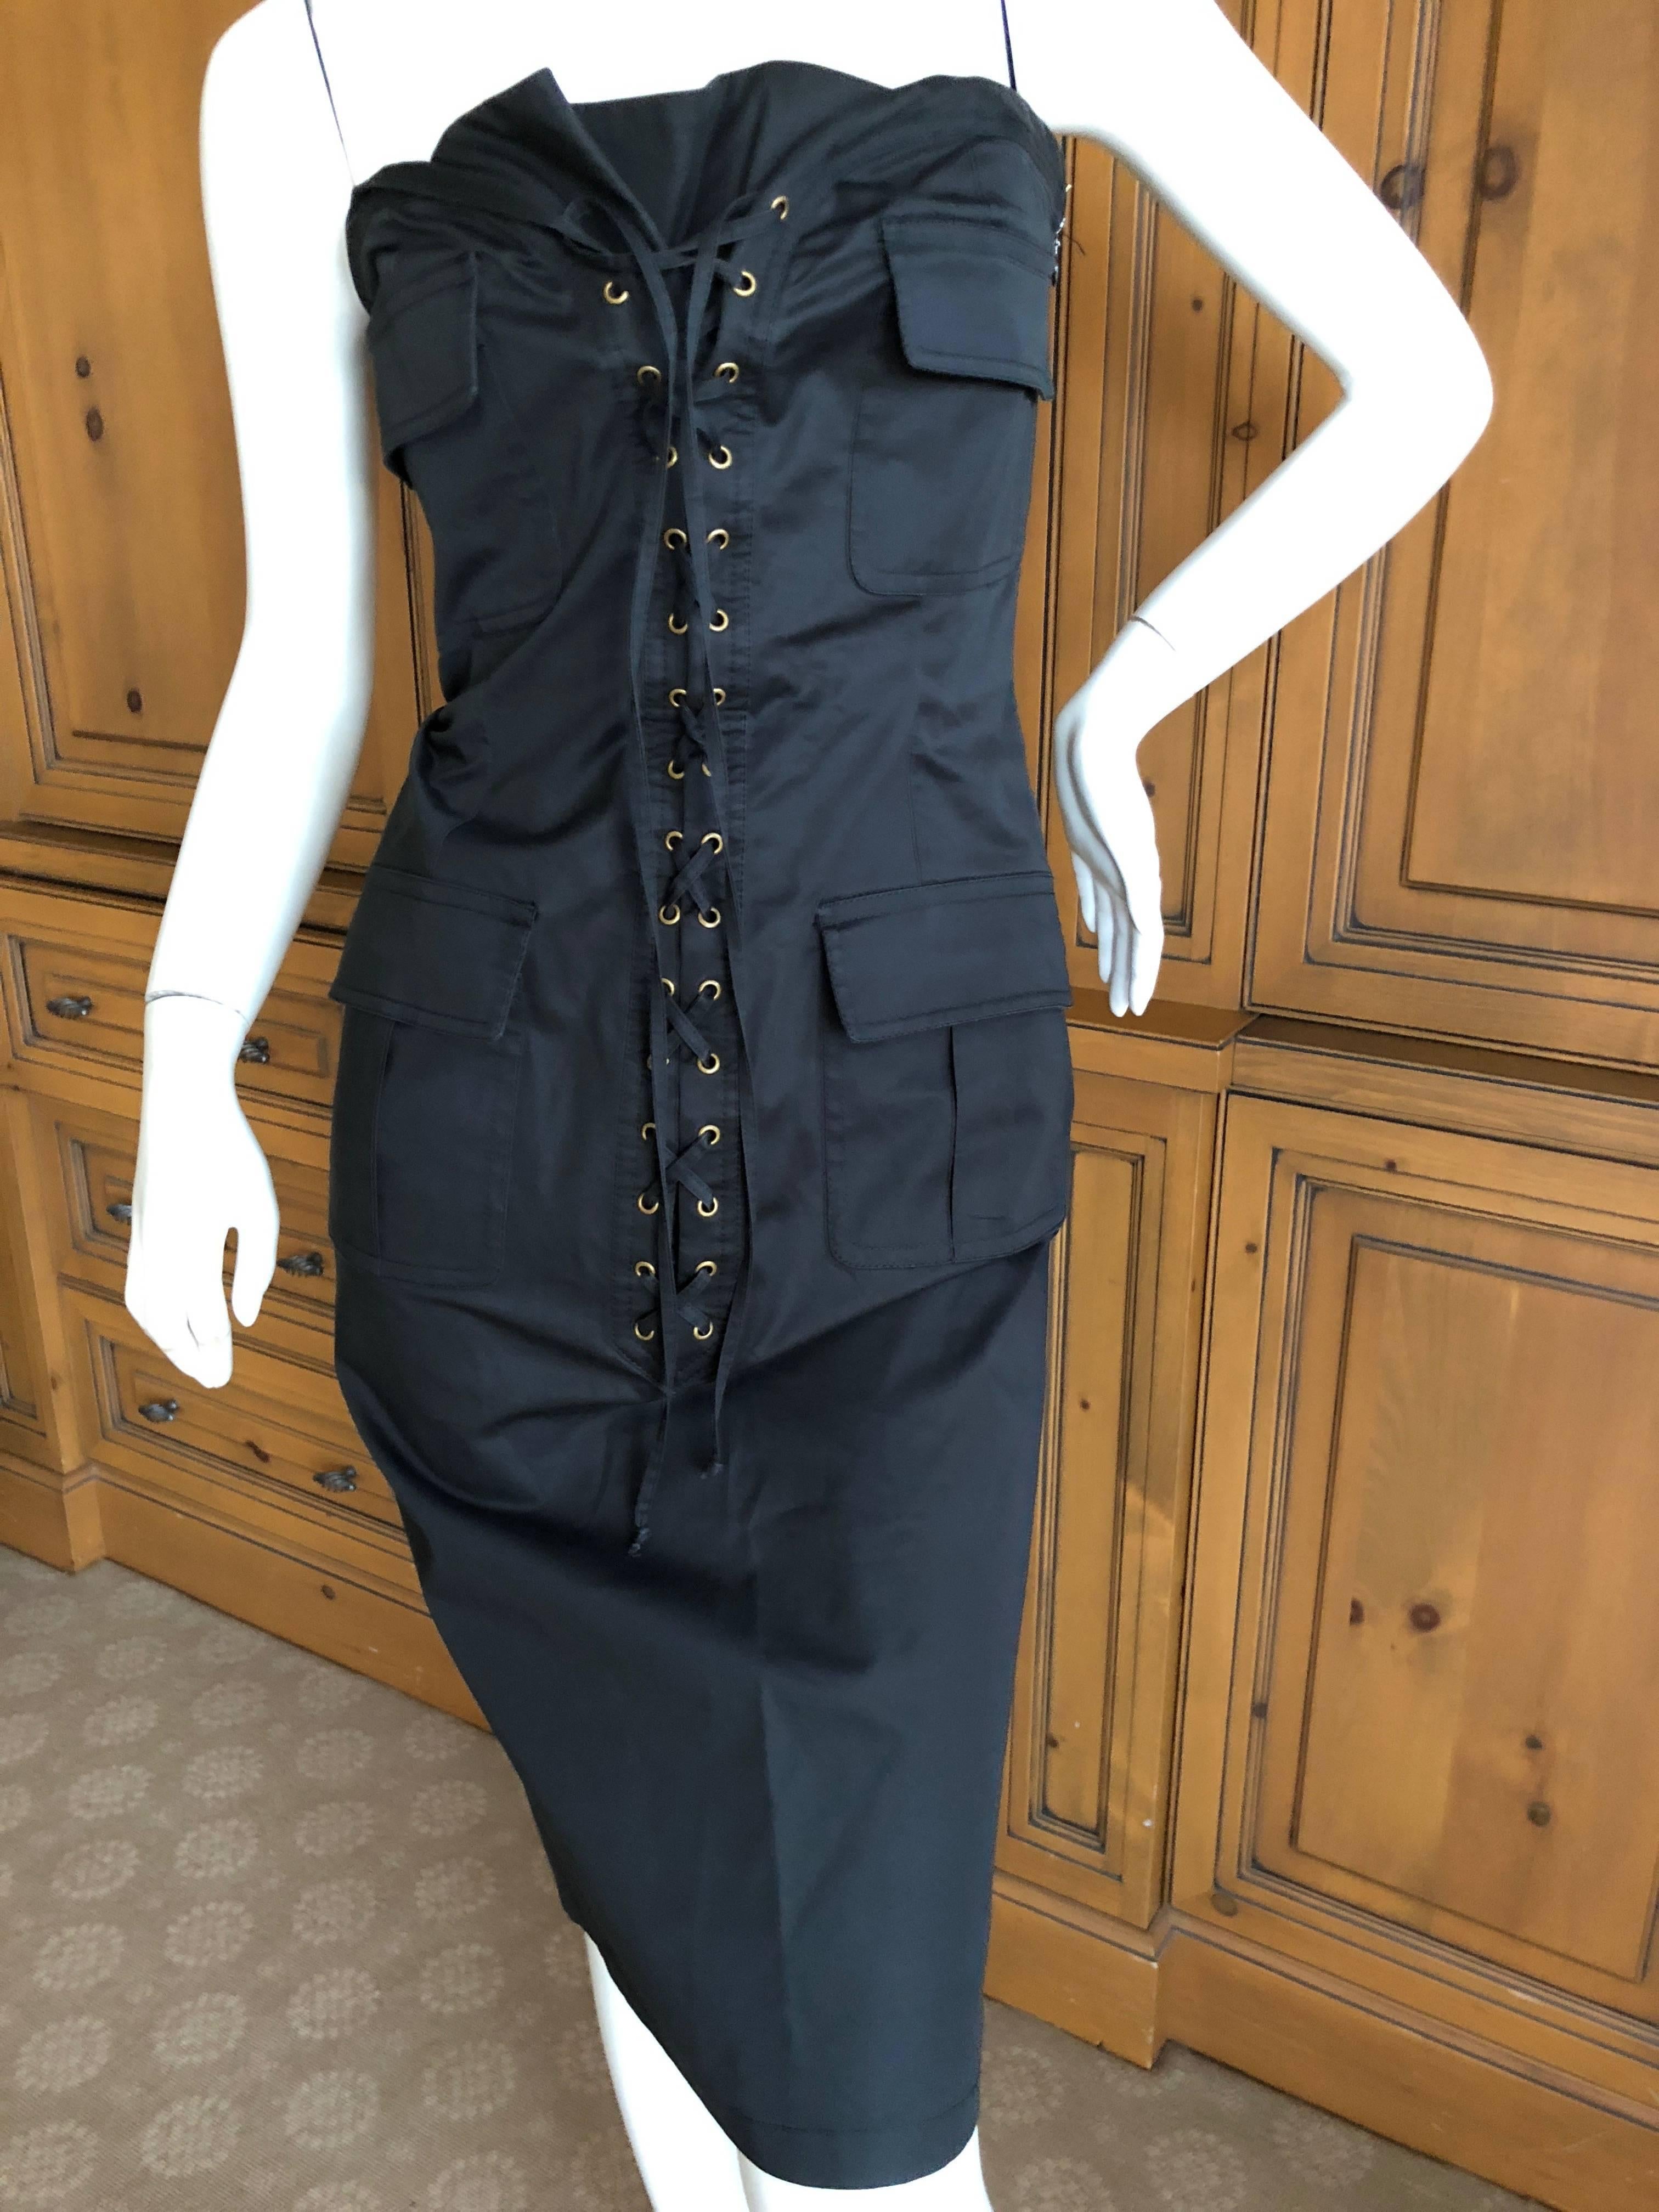 Yves Saint Laurent by Tom Ford Strapless Black Safari Dress with Corset Lacing  For Sale 2